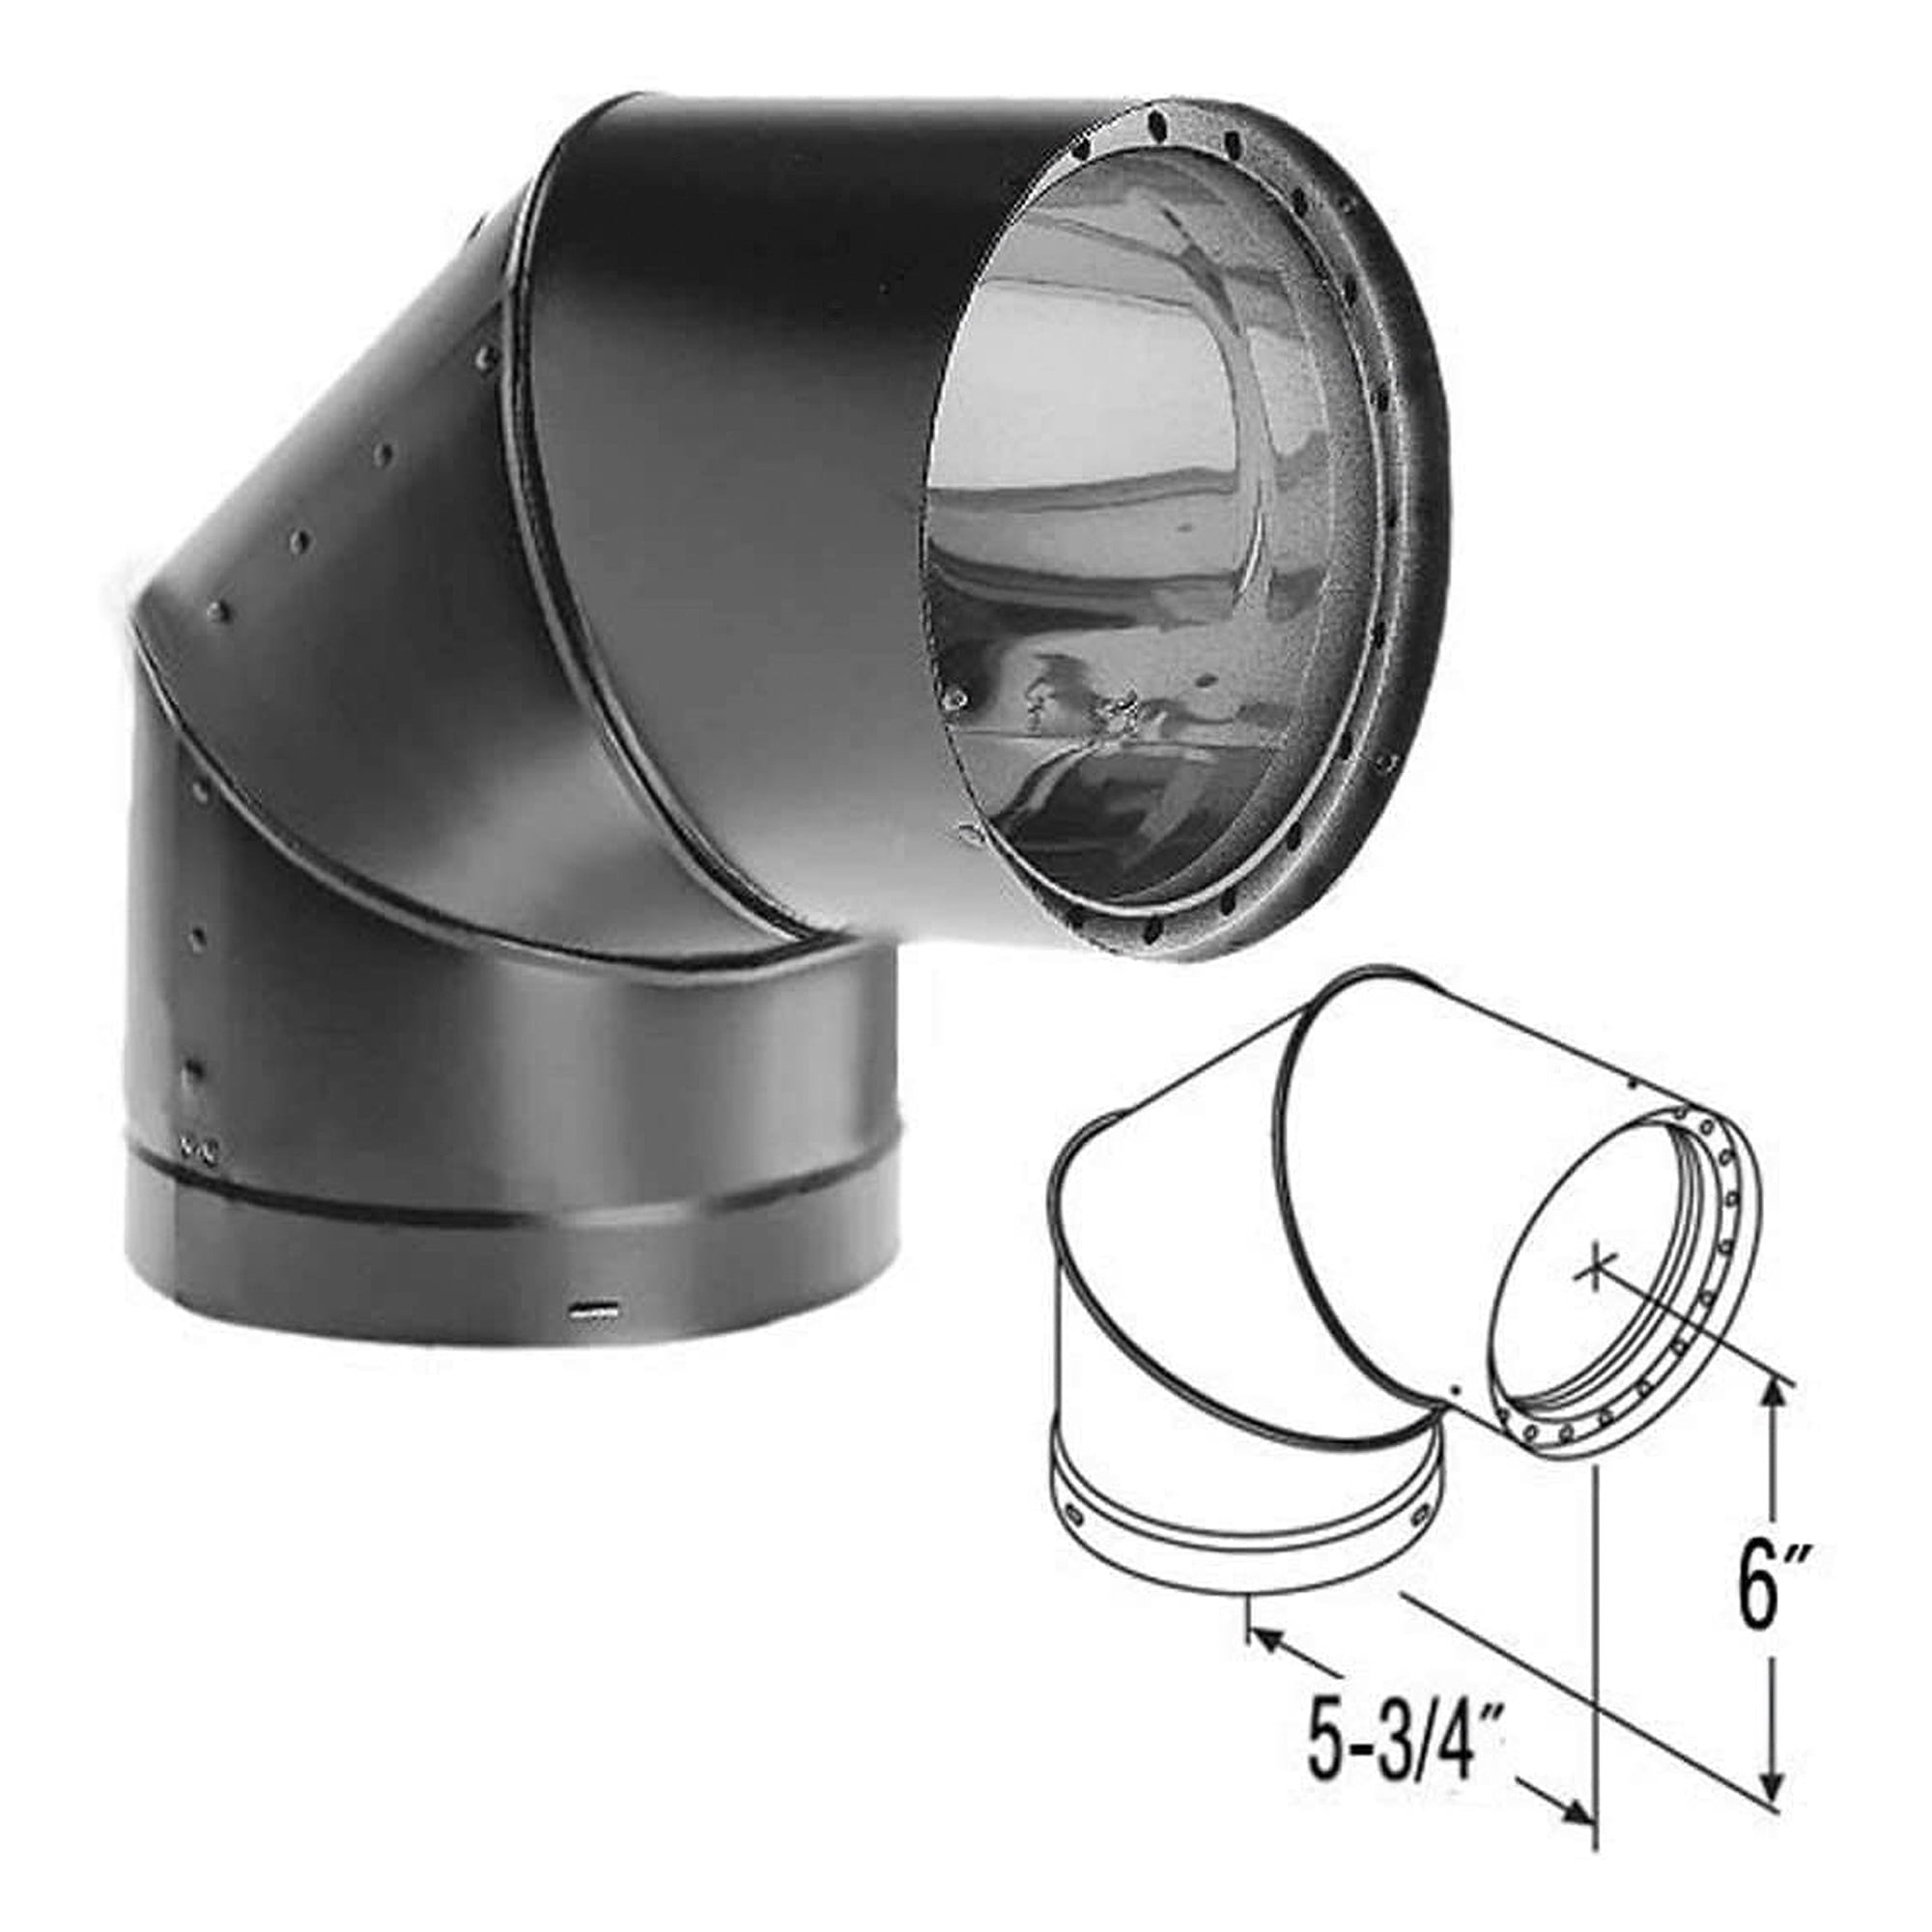 DuraVent 6 - inch Diameter DVL Double-Wall Black Stove Pipe & Components